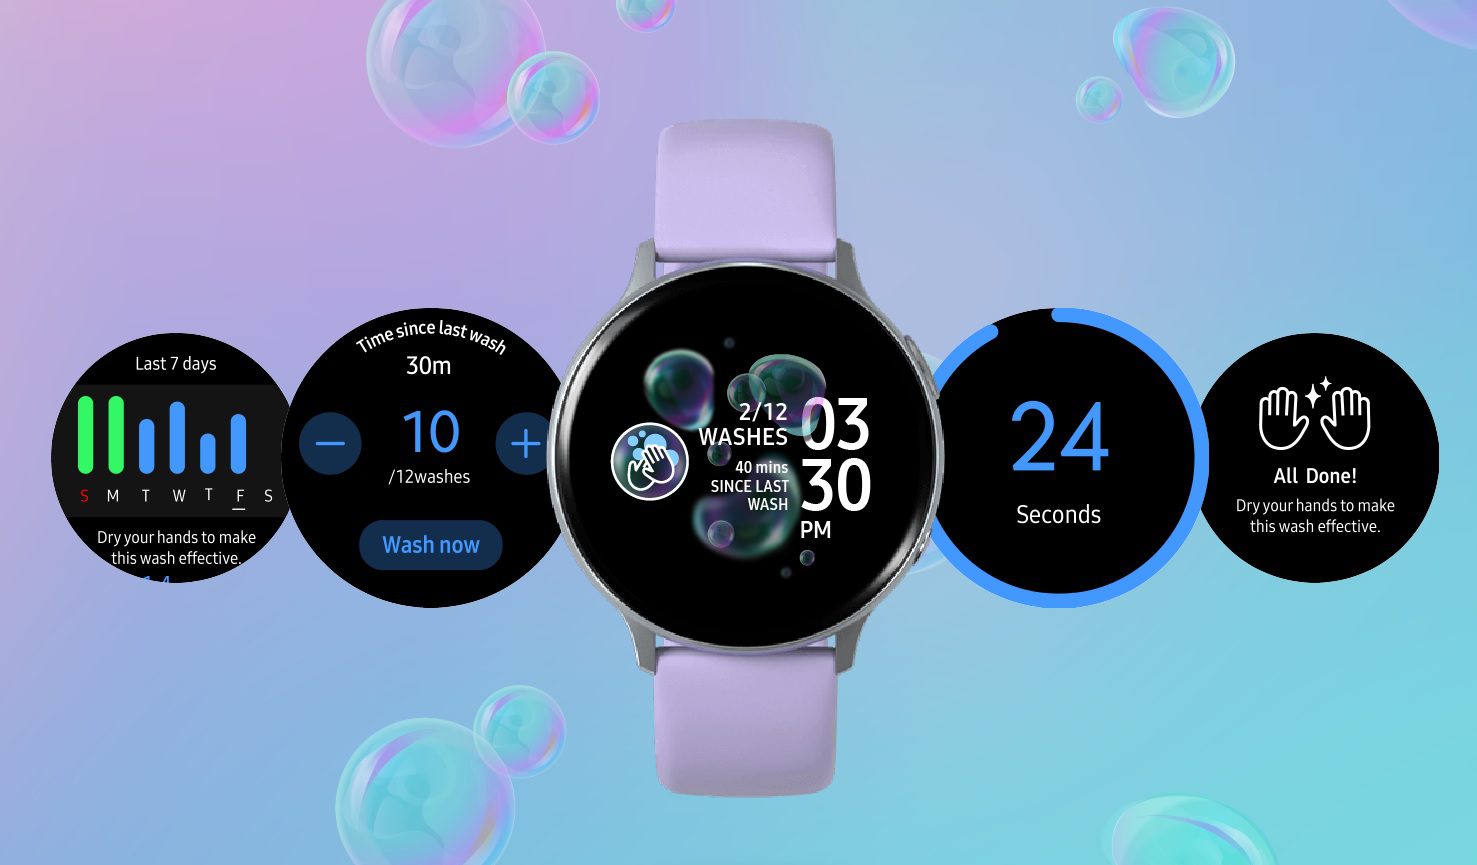 Samsung release its own hand-washing app for Samsung Galaxy Active smartwatches